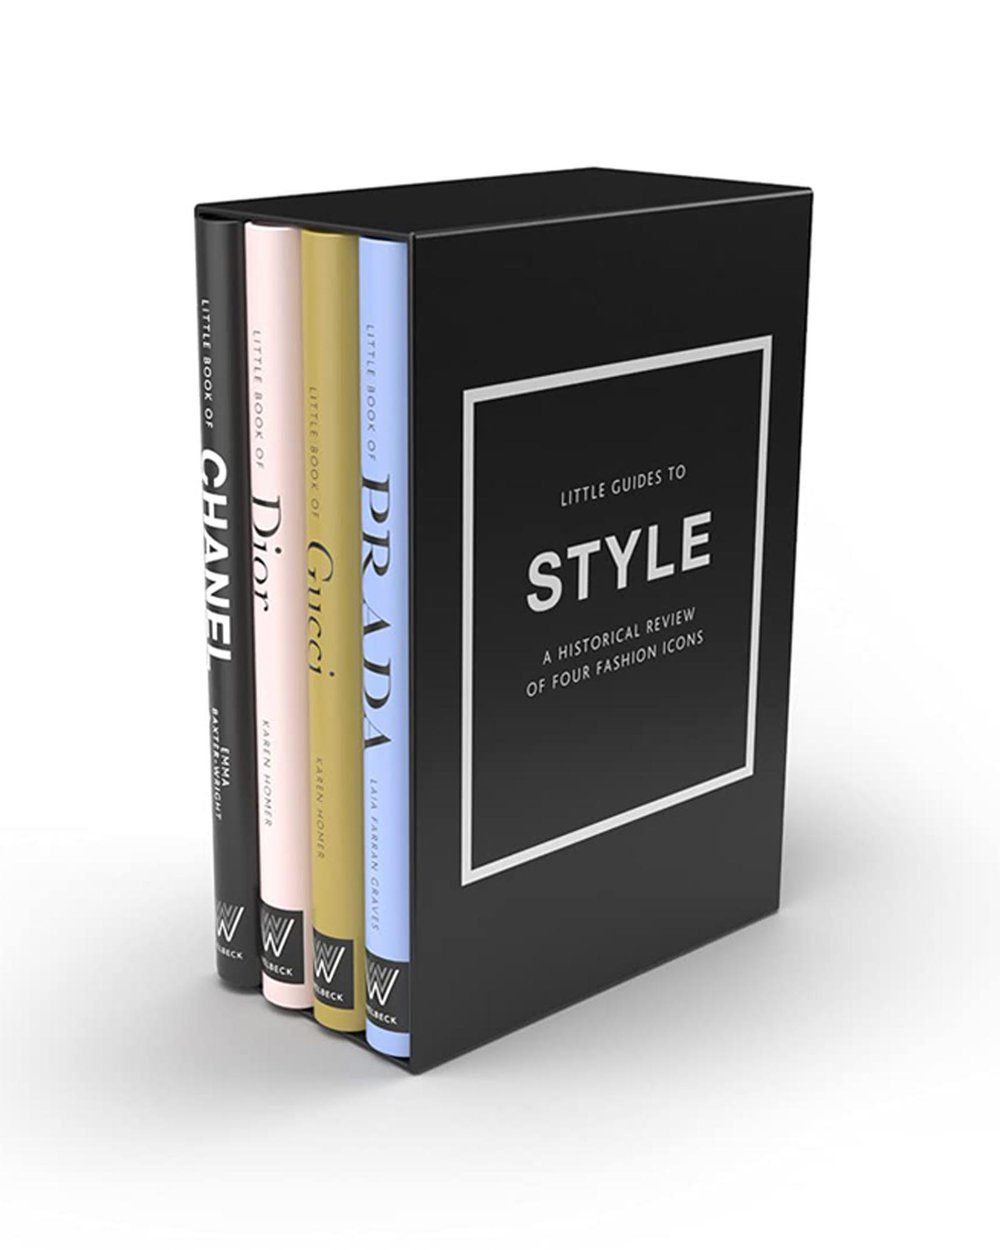 Little Guides to Style Slipcase | THE ICONIC (AU & NZ)